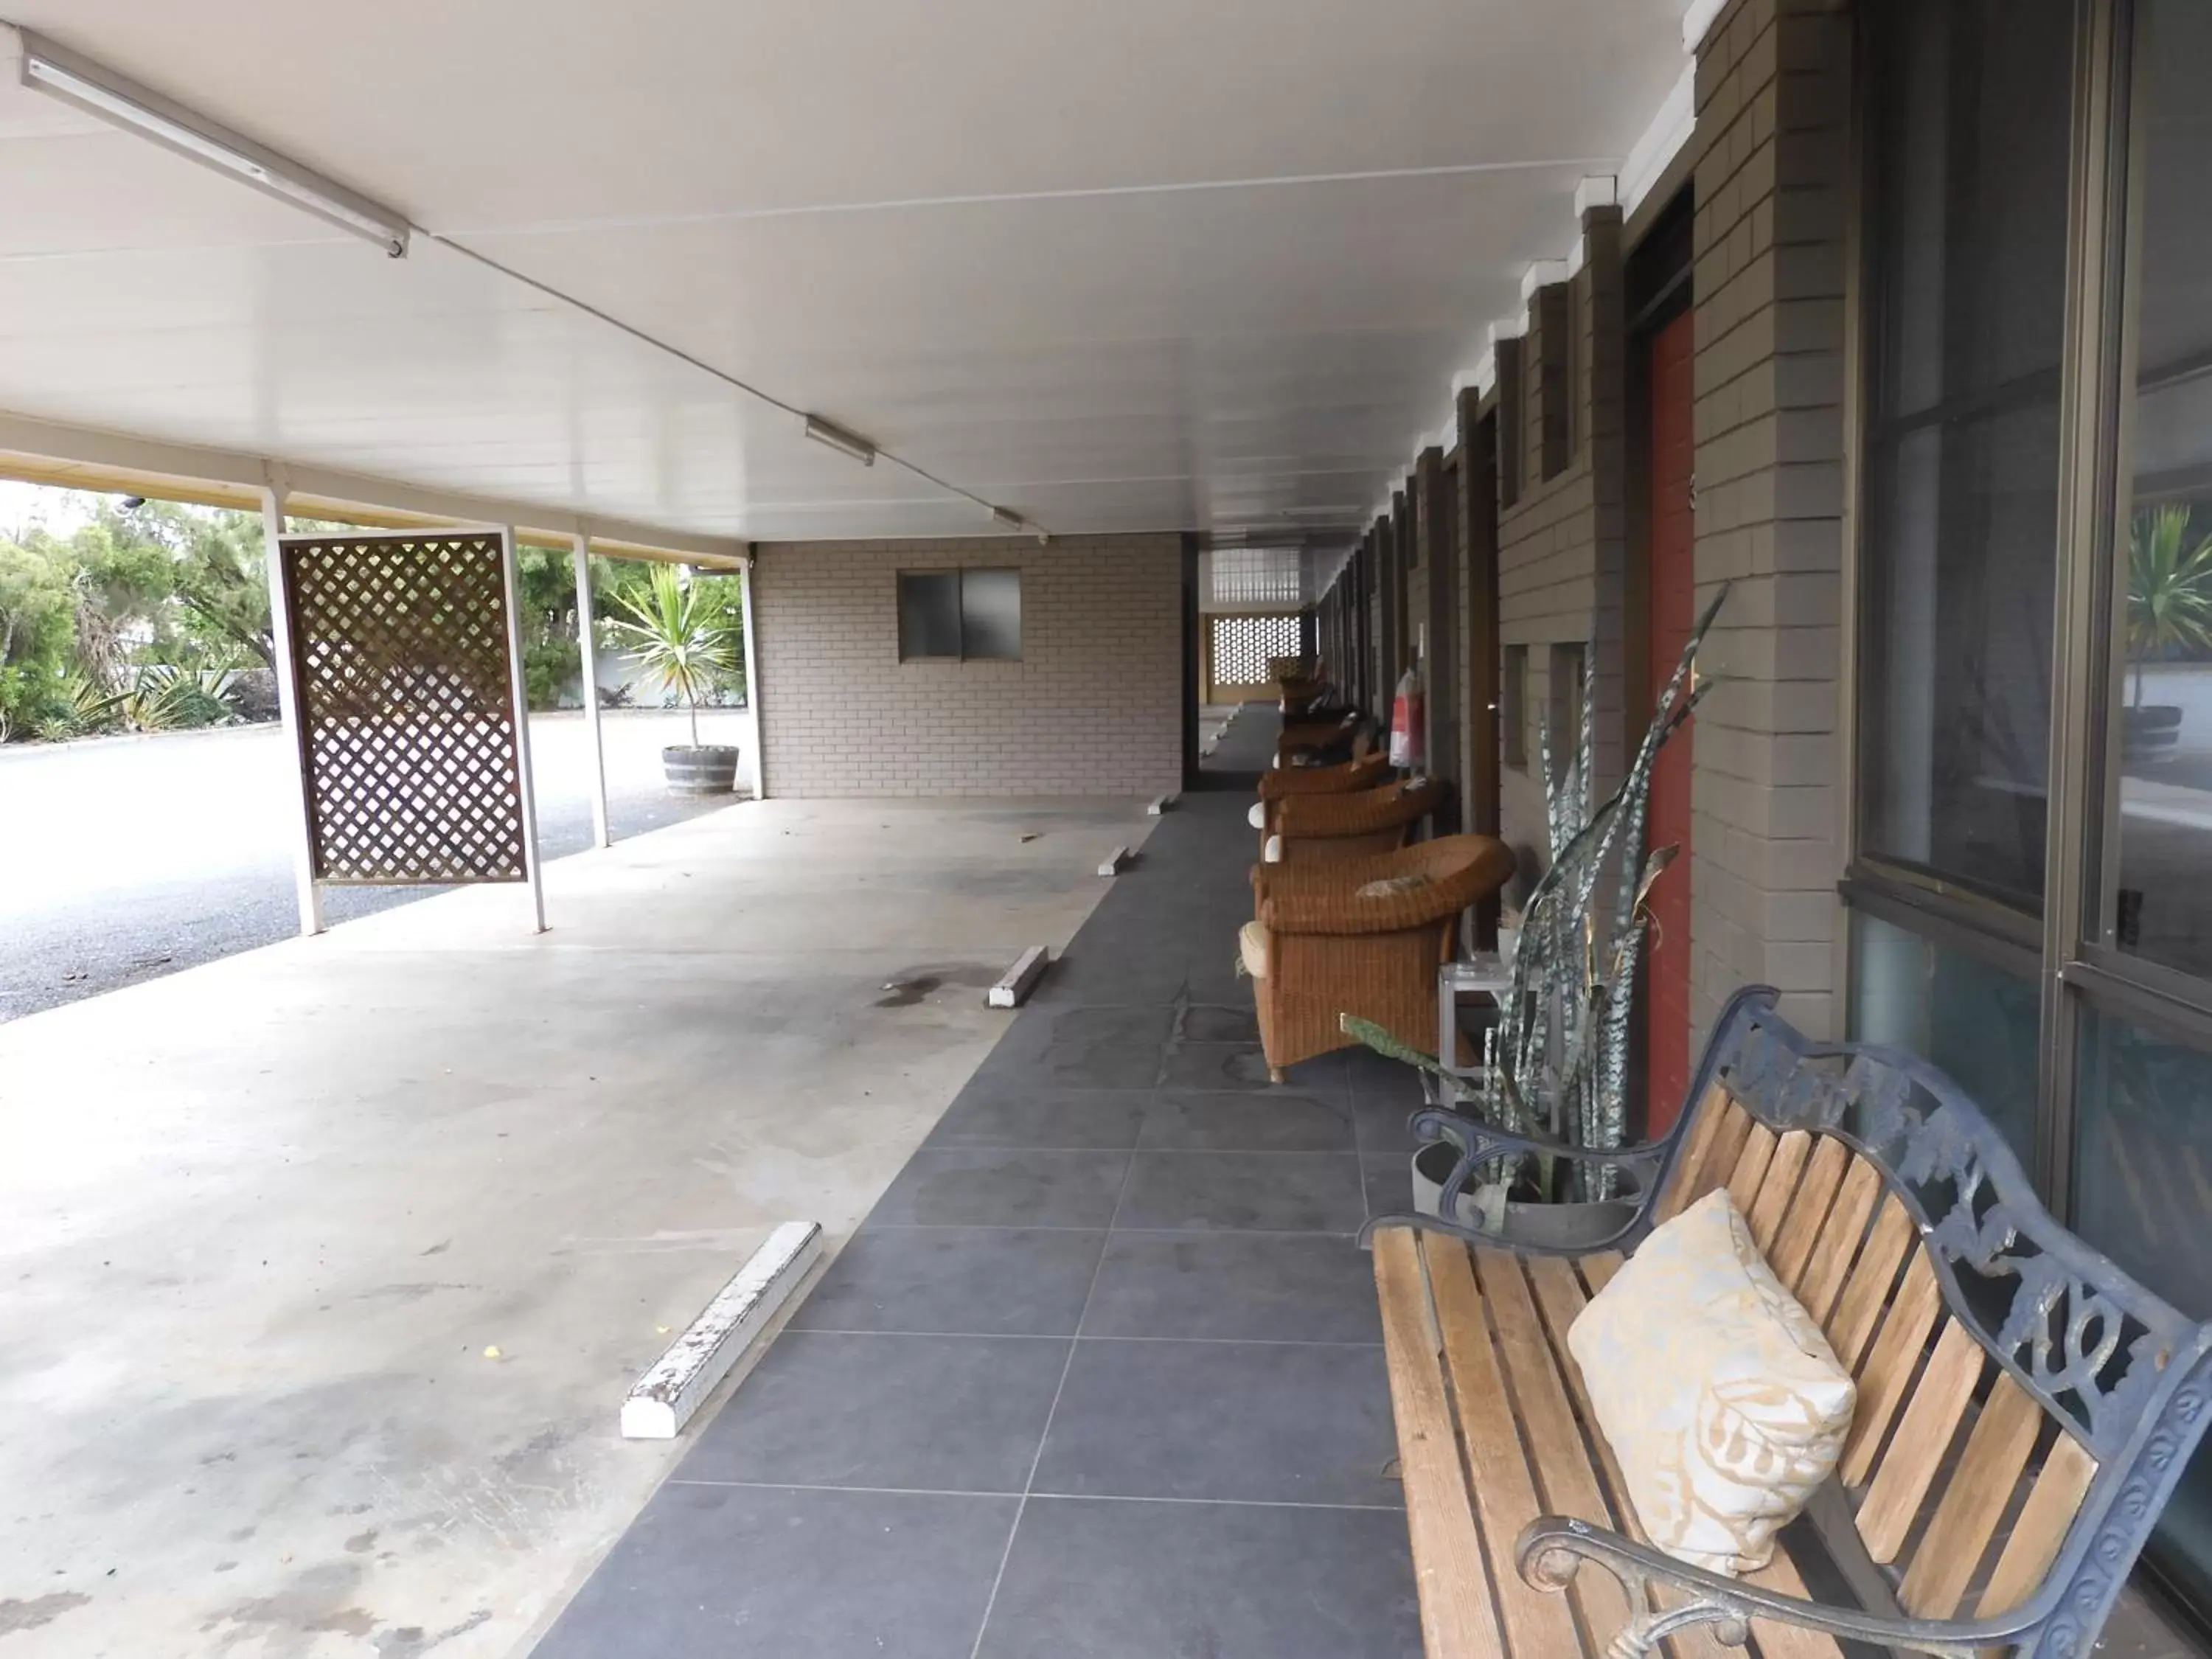 Property building in Dalby Parkview Motel